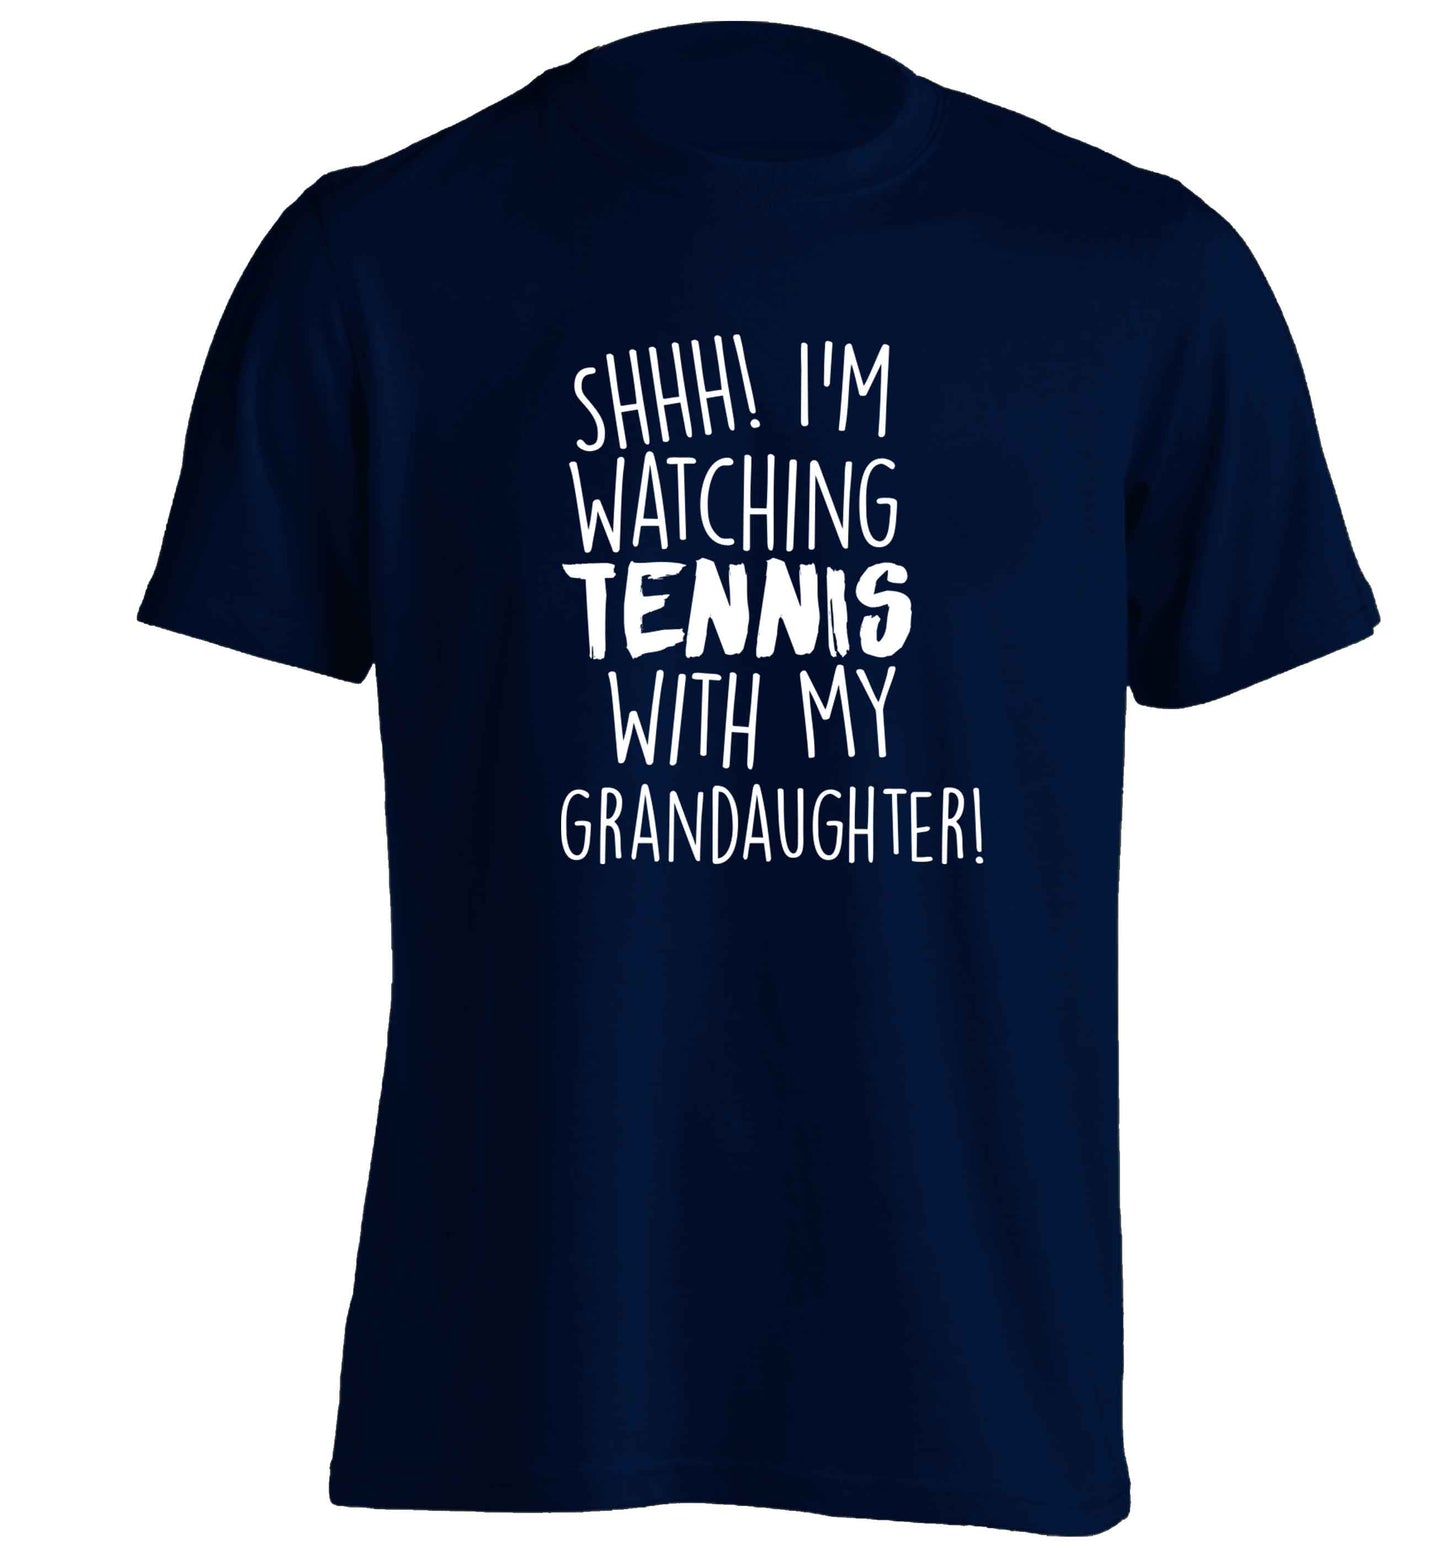 Shh! I'm watching tennis with my granddaughter! adults unisex navy Tshirt 2XL